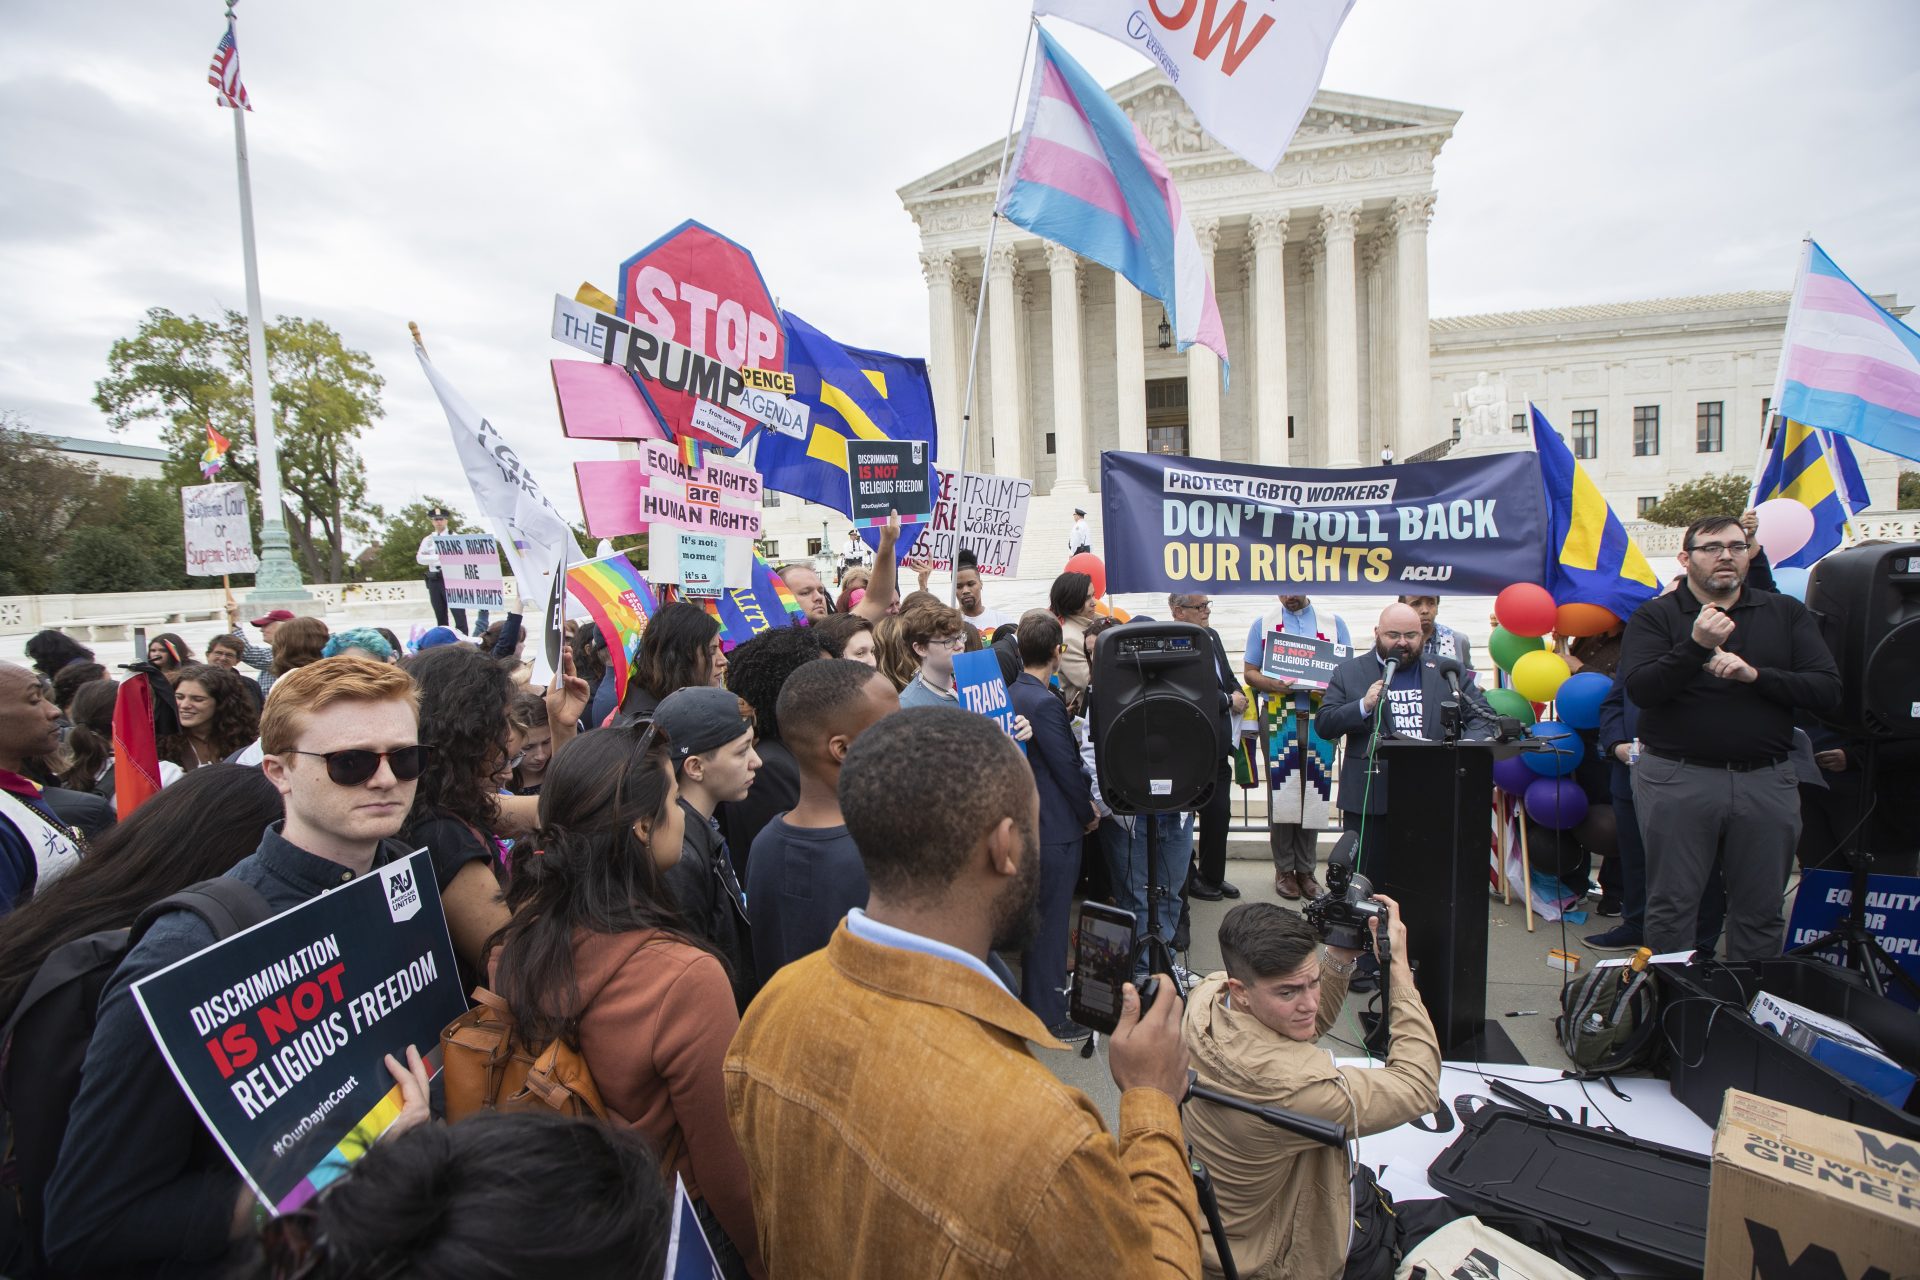 LGBT supporters gather in front of the U.S. Supreme Court, Tuesday, Oct. 8, 2019, in Washington. The Supreme Court is set to hear arguments in its first cases on LGBT rights since the retirement of Justice Anthony Kennedy. Kennedy was a voice for gay rights while his successor, Brett Kavanaugh, is regarded as more conservative.